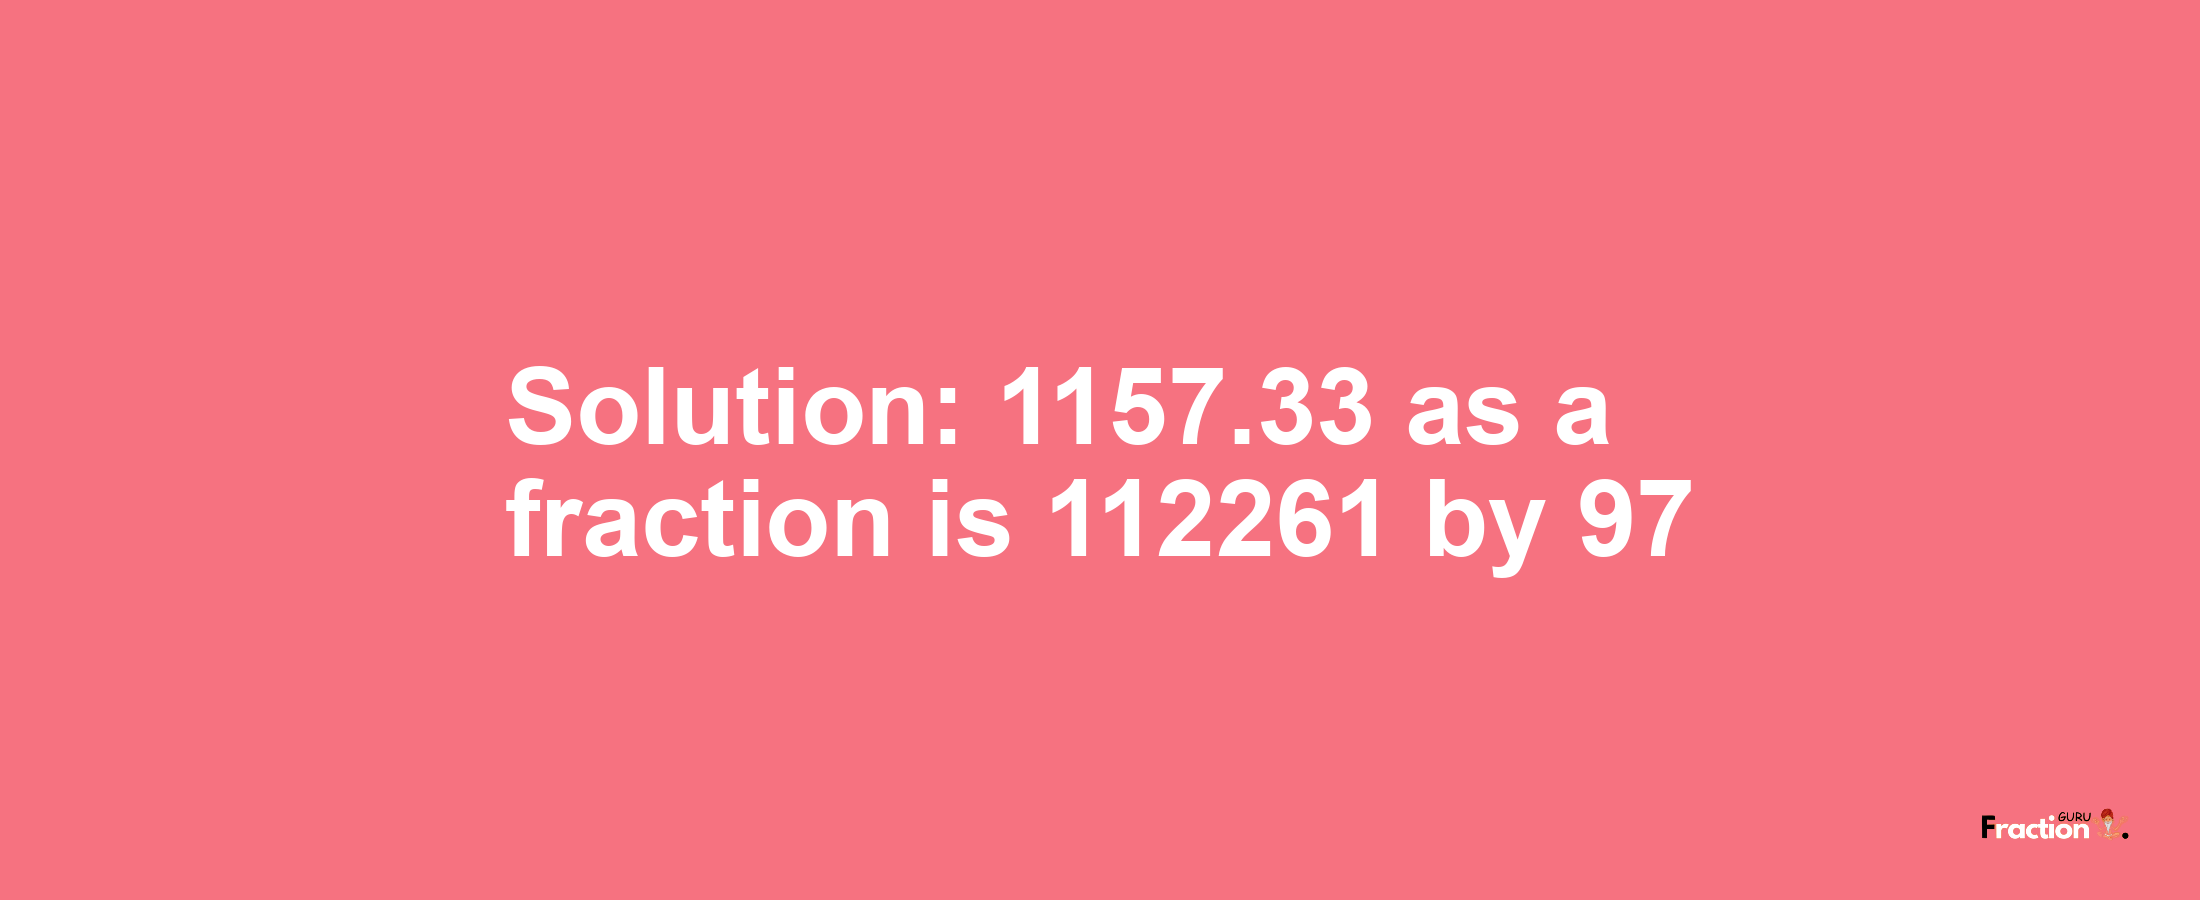 Solution:1157.33 as a fraction is 112261/97